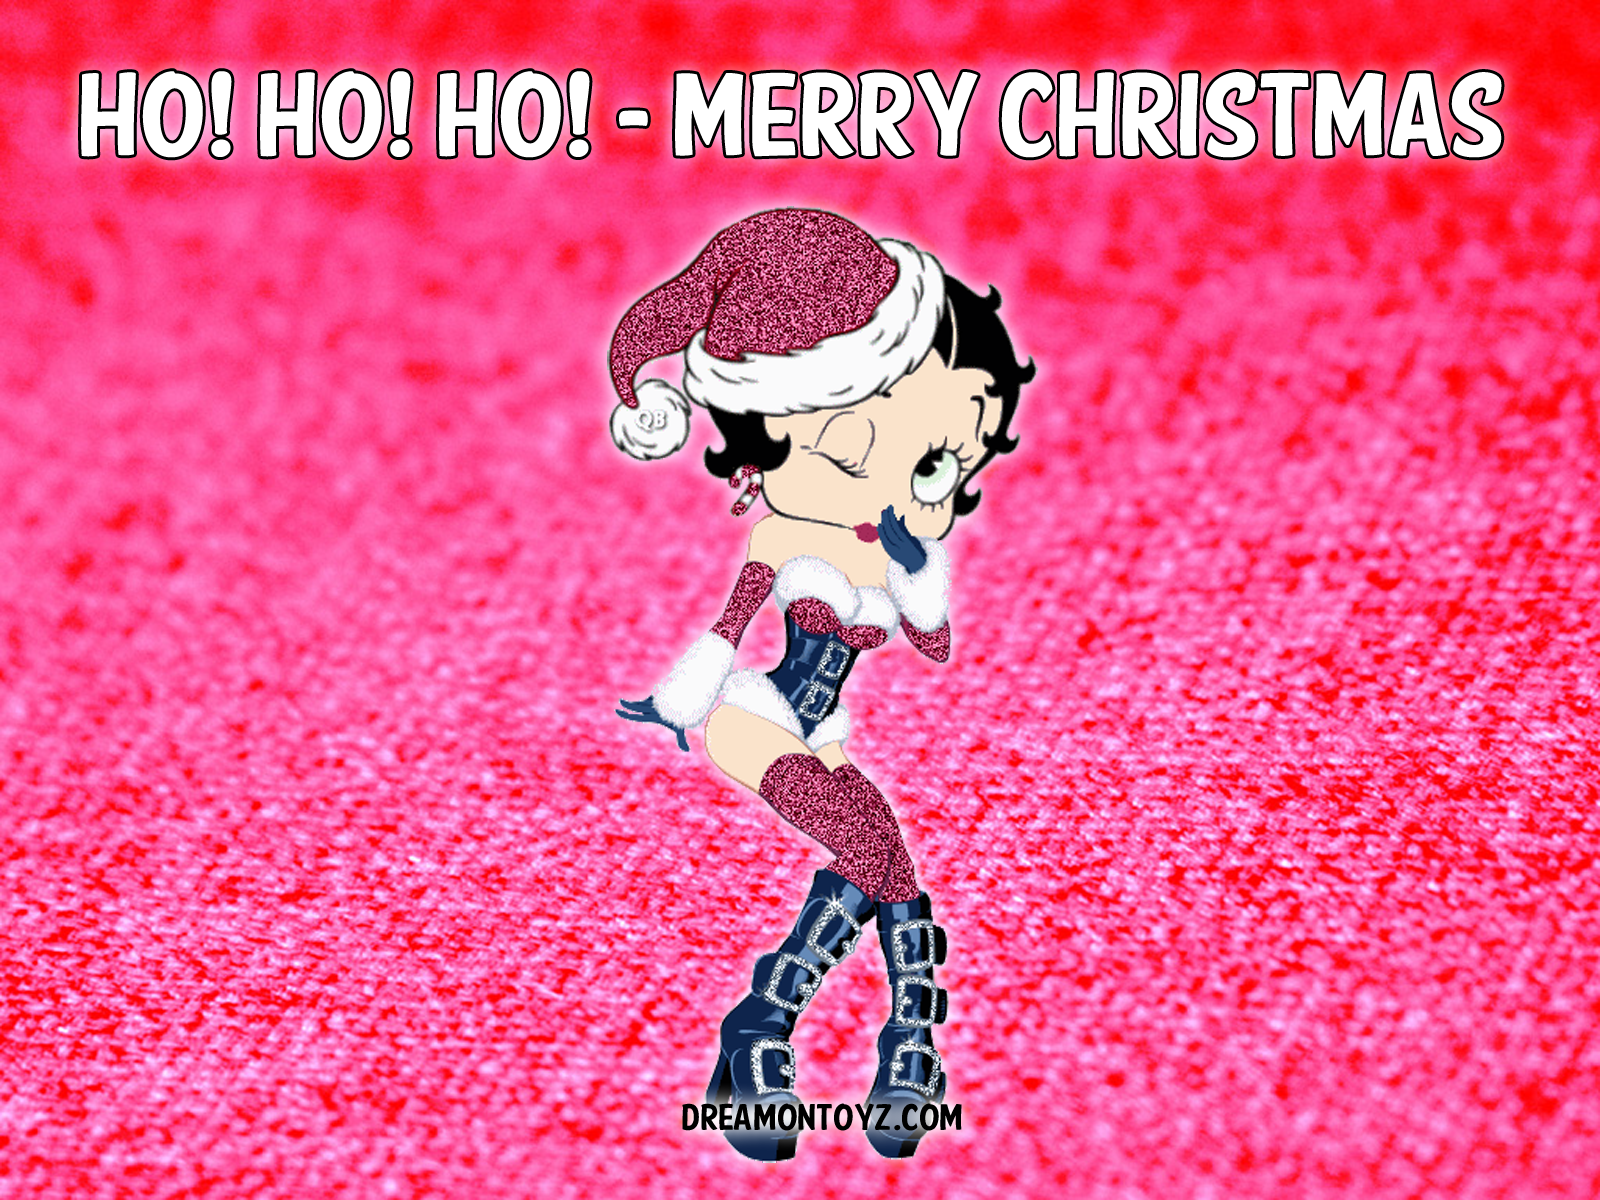 Betty Boop Pictures Archive Santa Merry